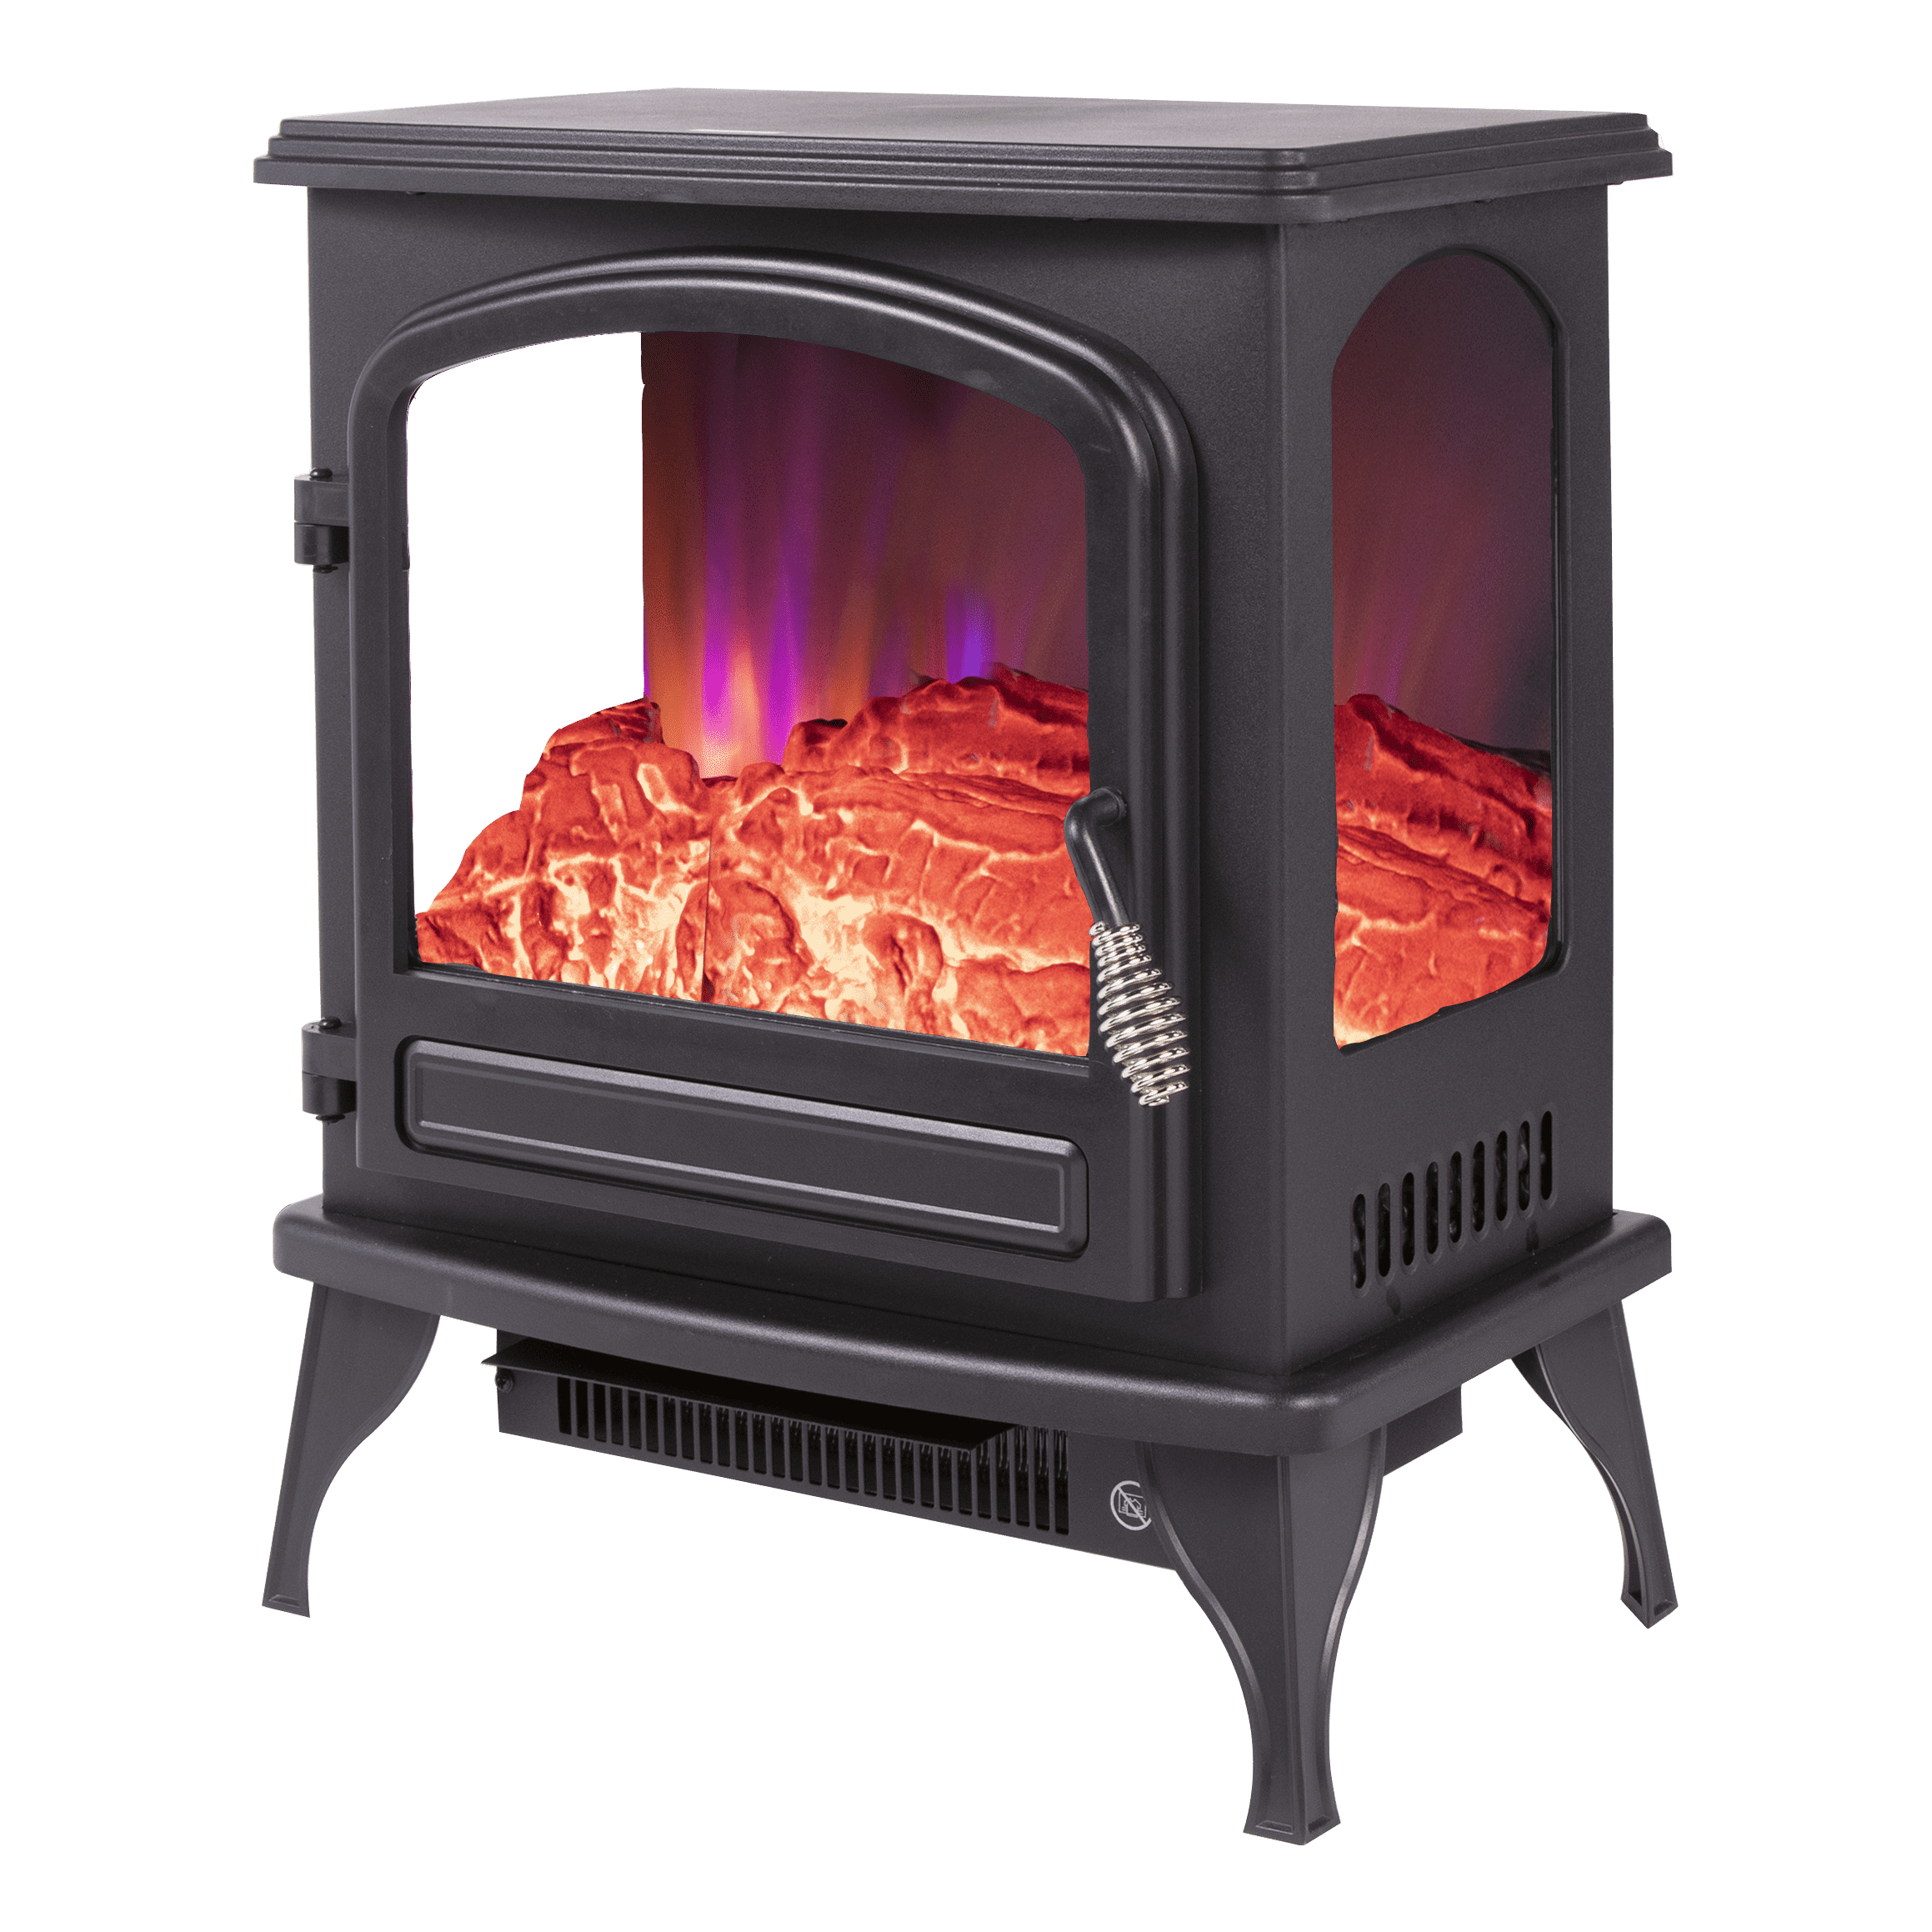 Used LifeSmart 1500W Large Room 3-Sided Electric Infrared Stove Space Heater 